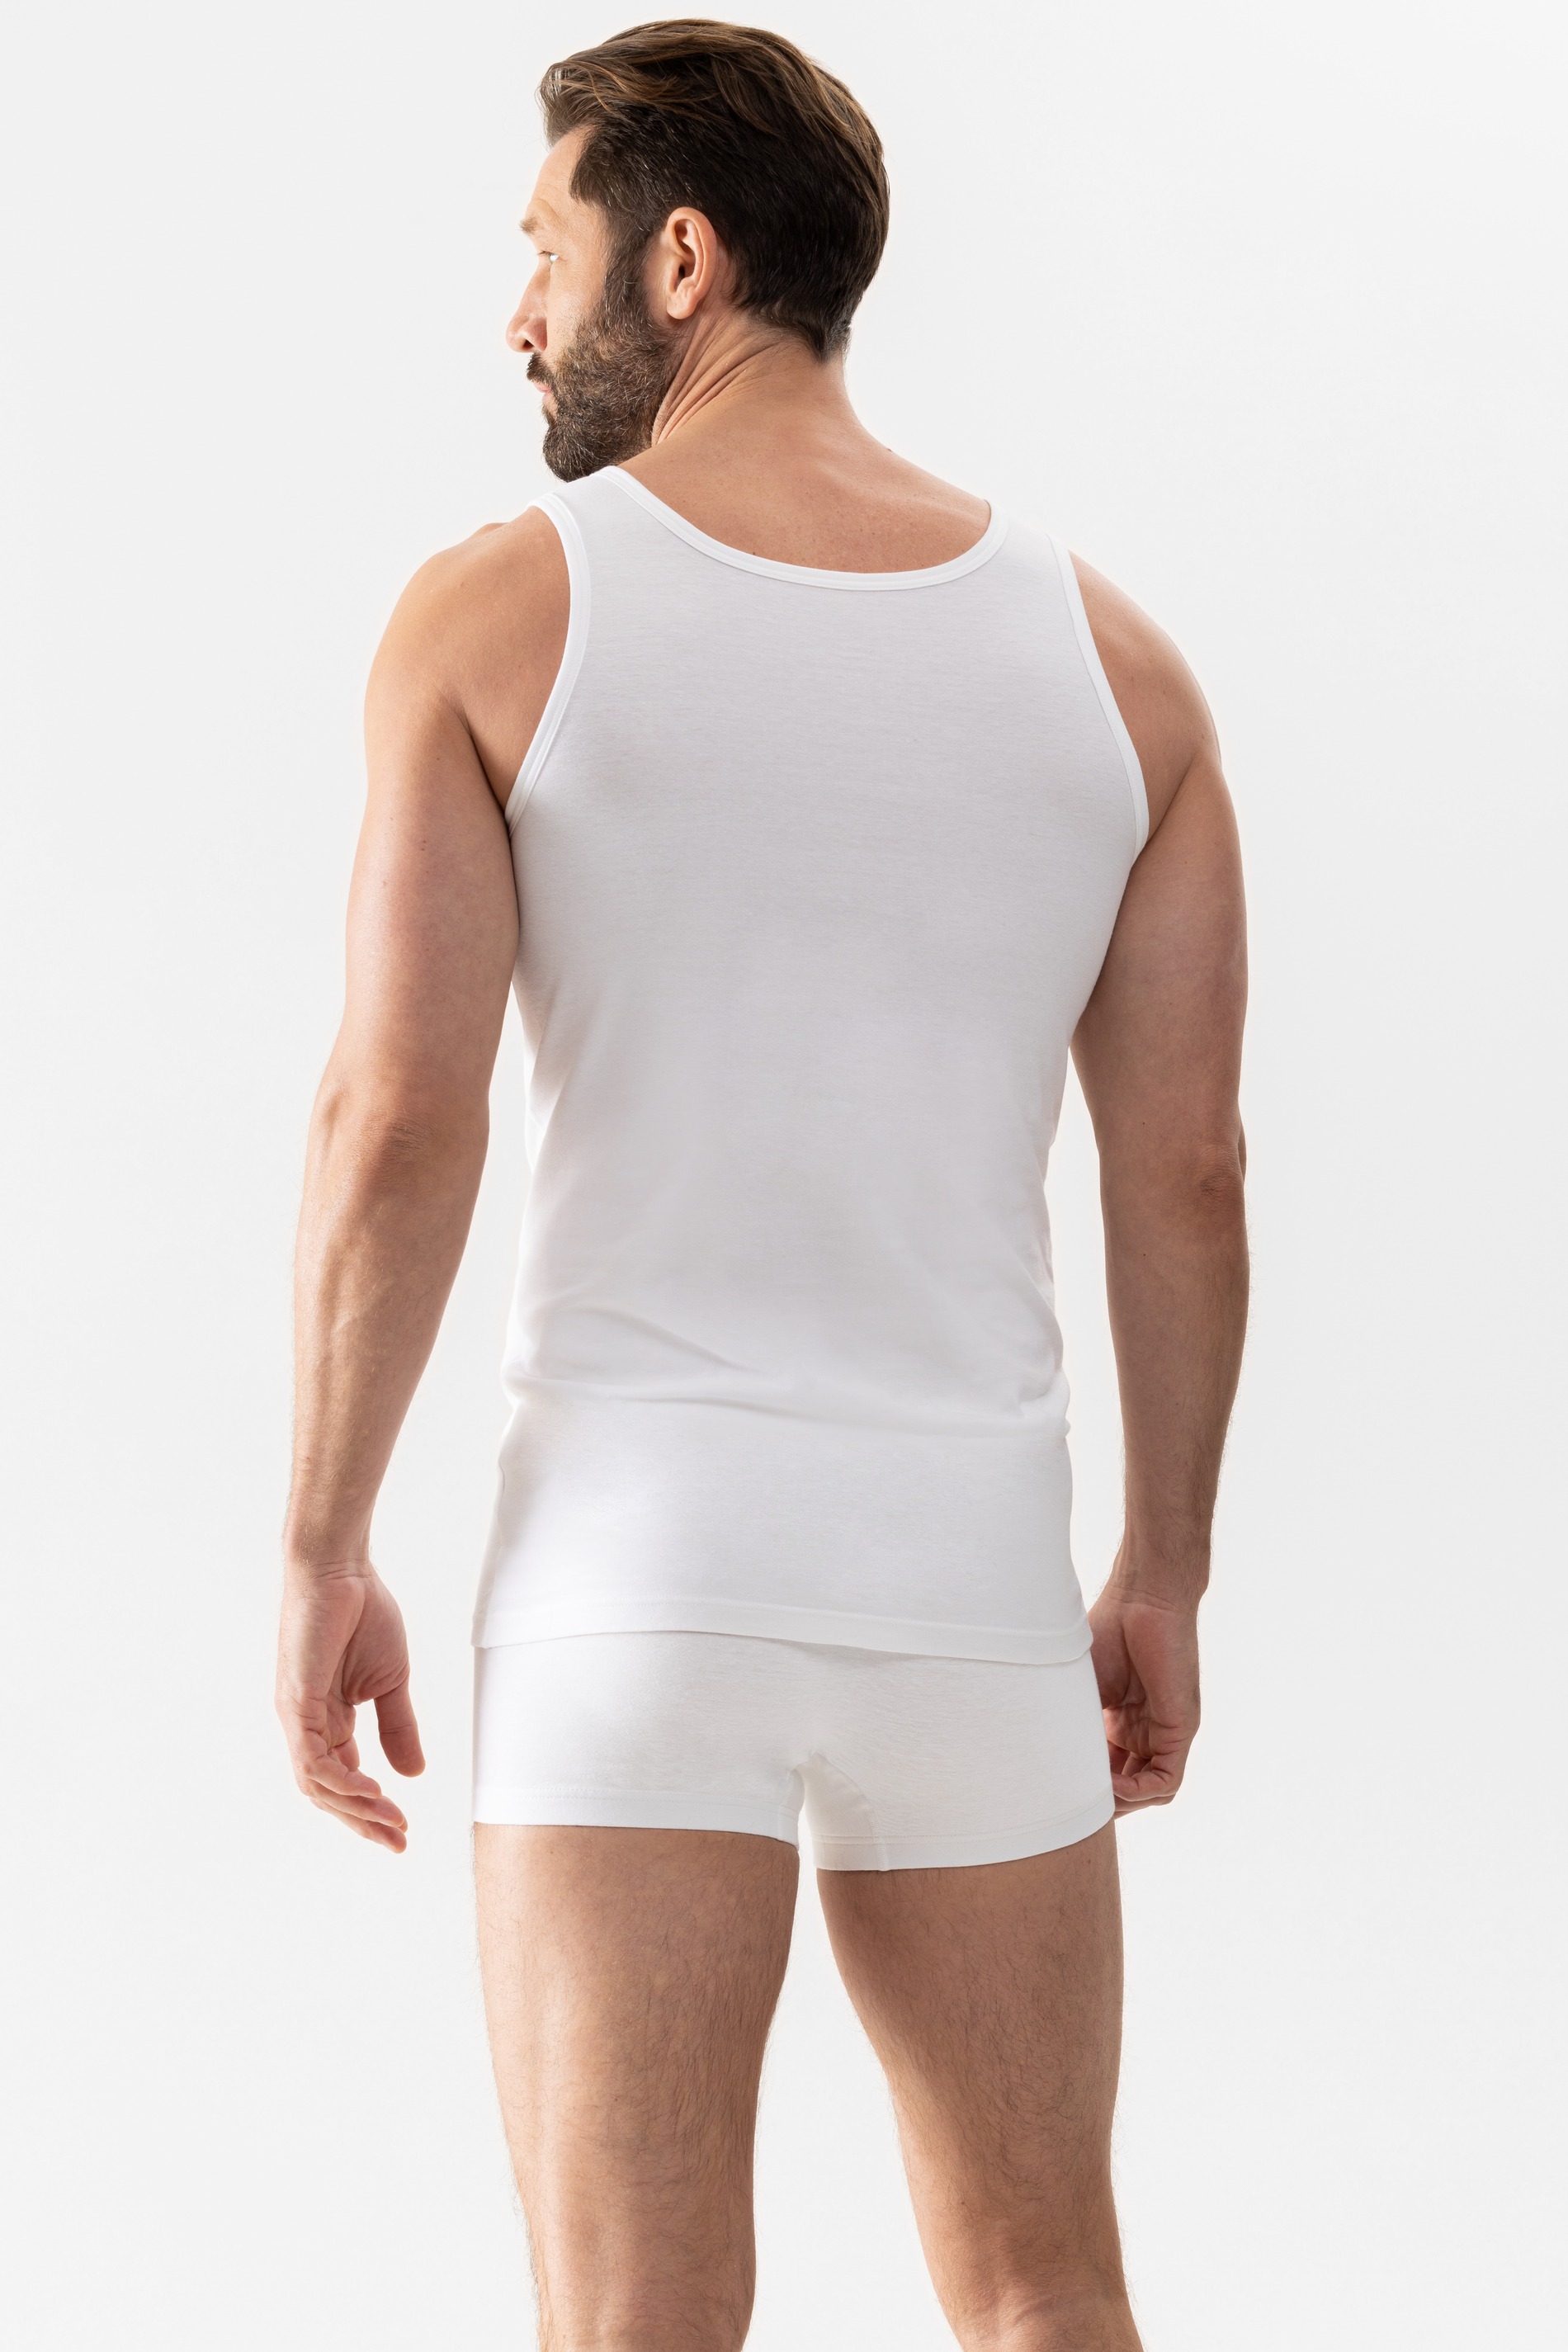 Athletic shirt White RE:THINK Rear View | mey®